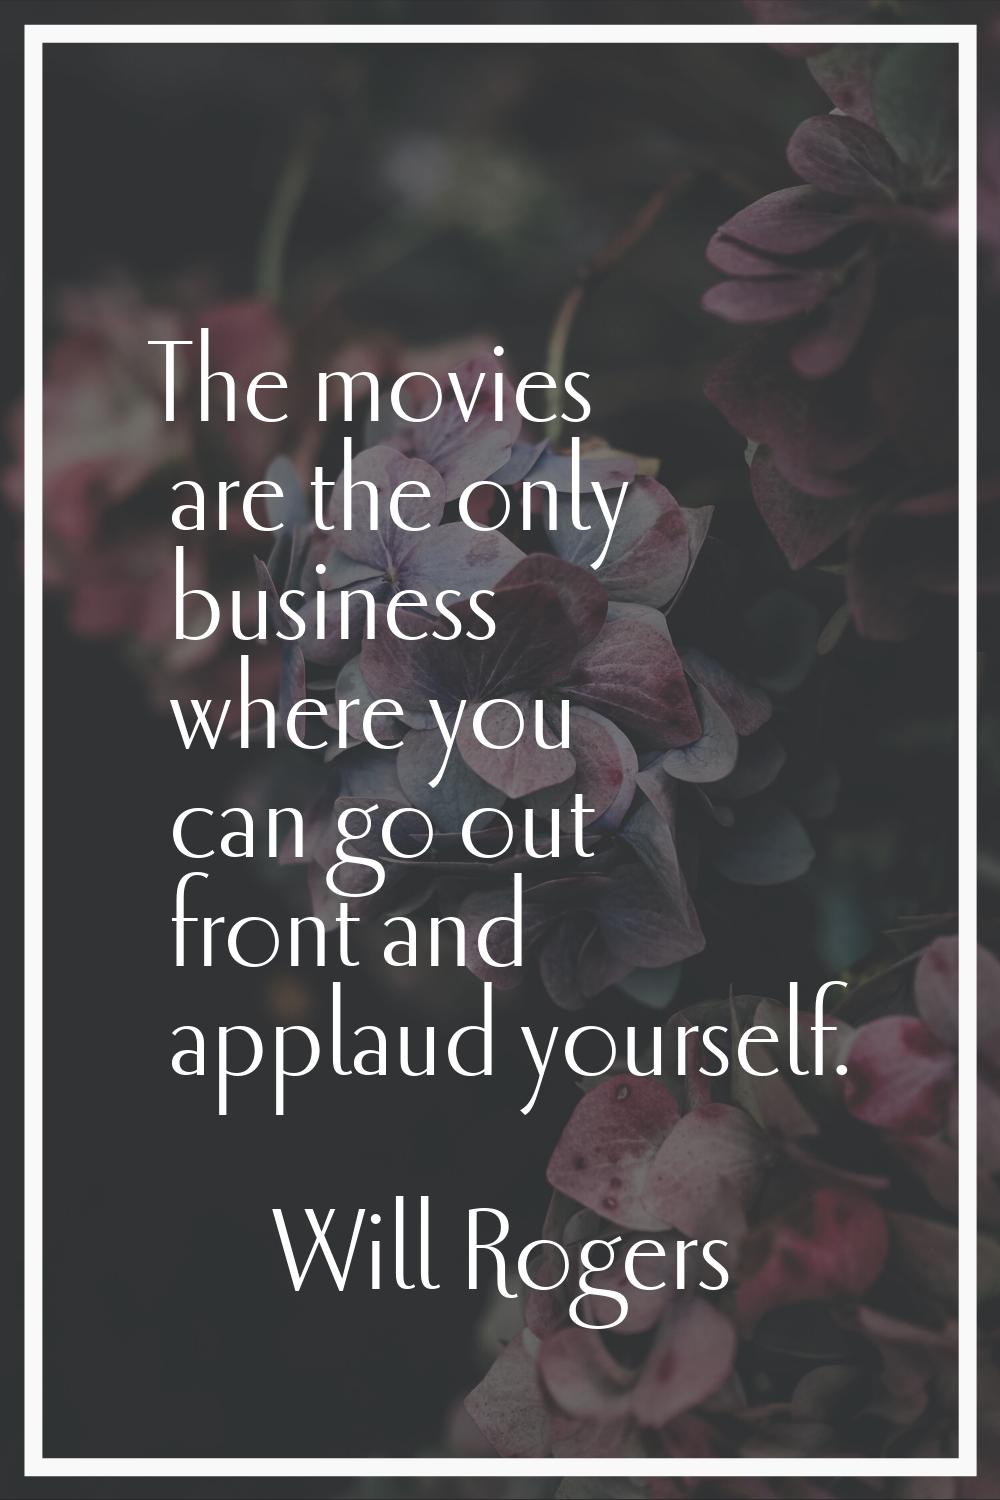 The movies are the only business where you can go out front and applaud yourself.